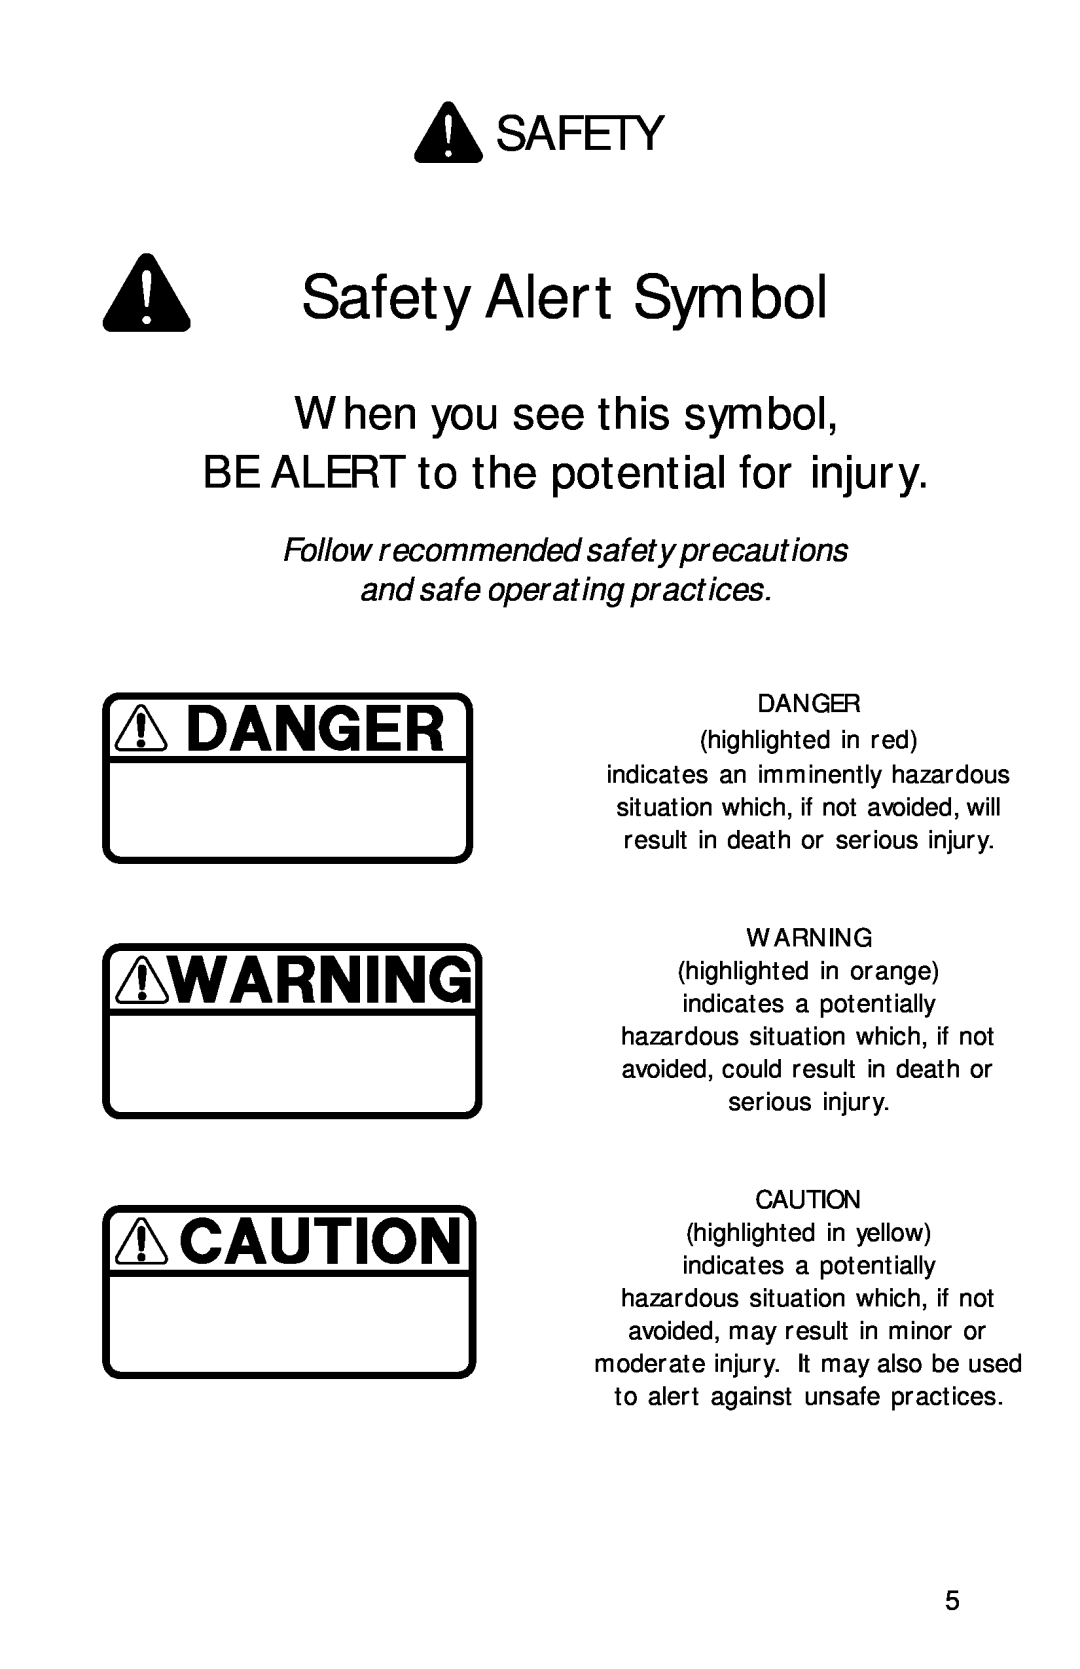 Dixon 13090-0601, ZTR 6023 manual Safety Alert Symbol, When you see this symbol BE ALERT to the potential for injury 